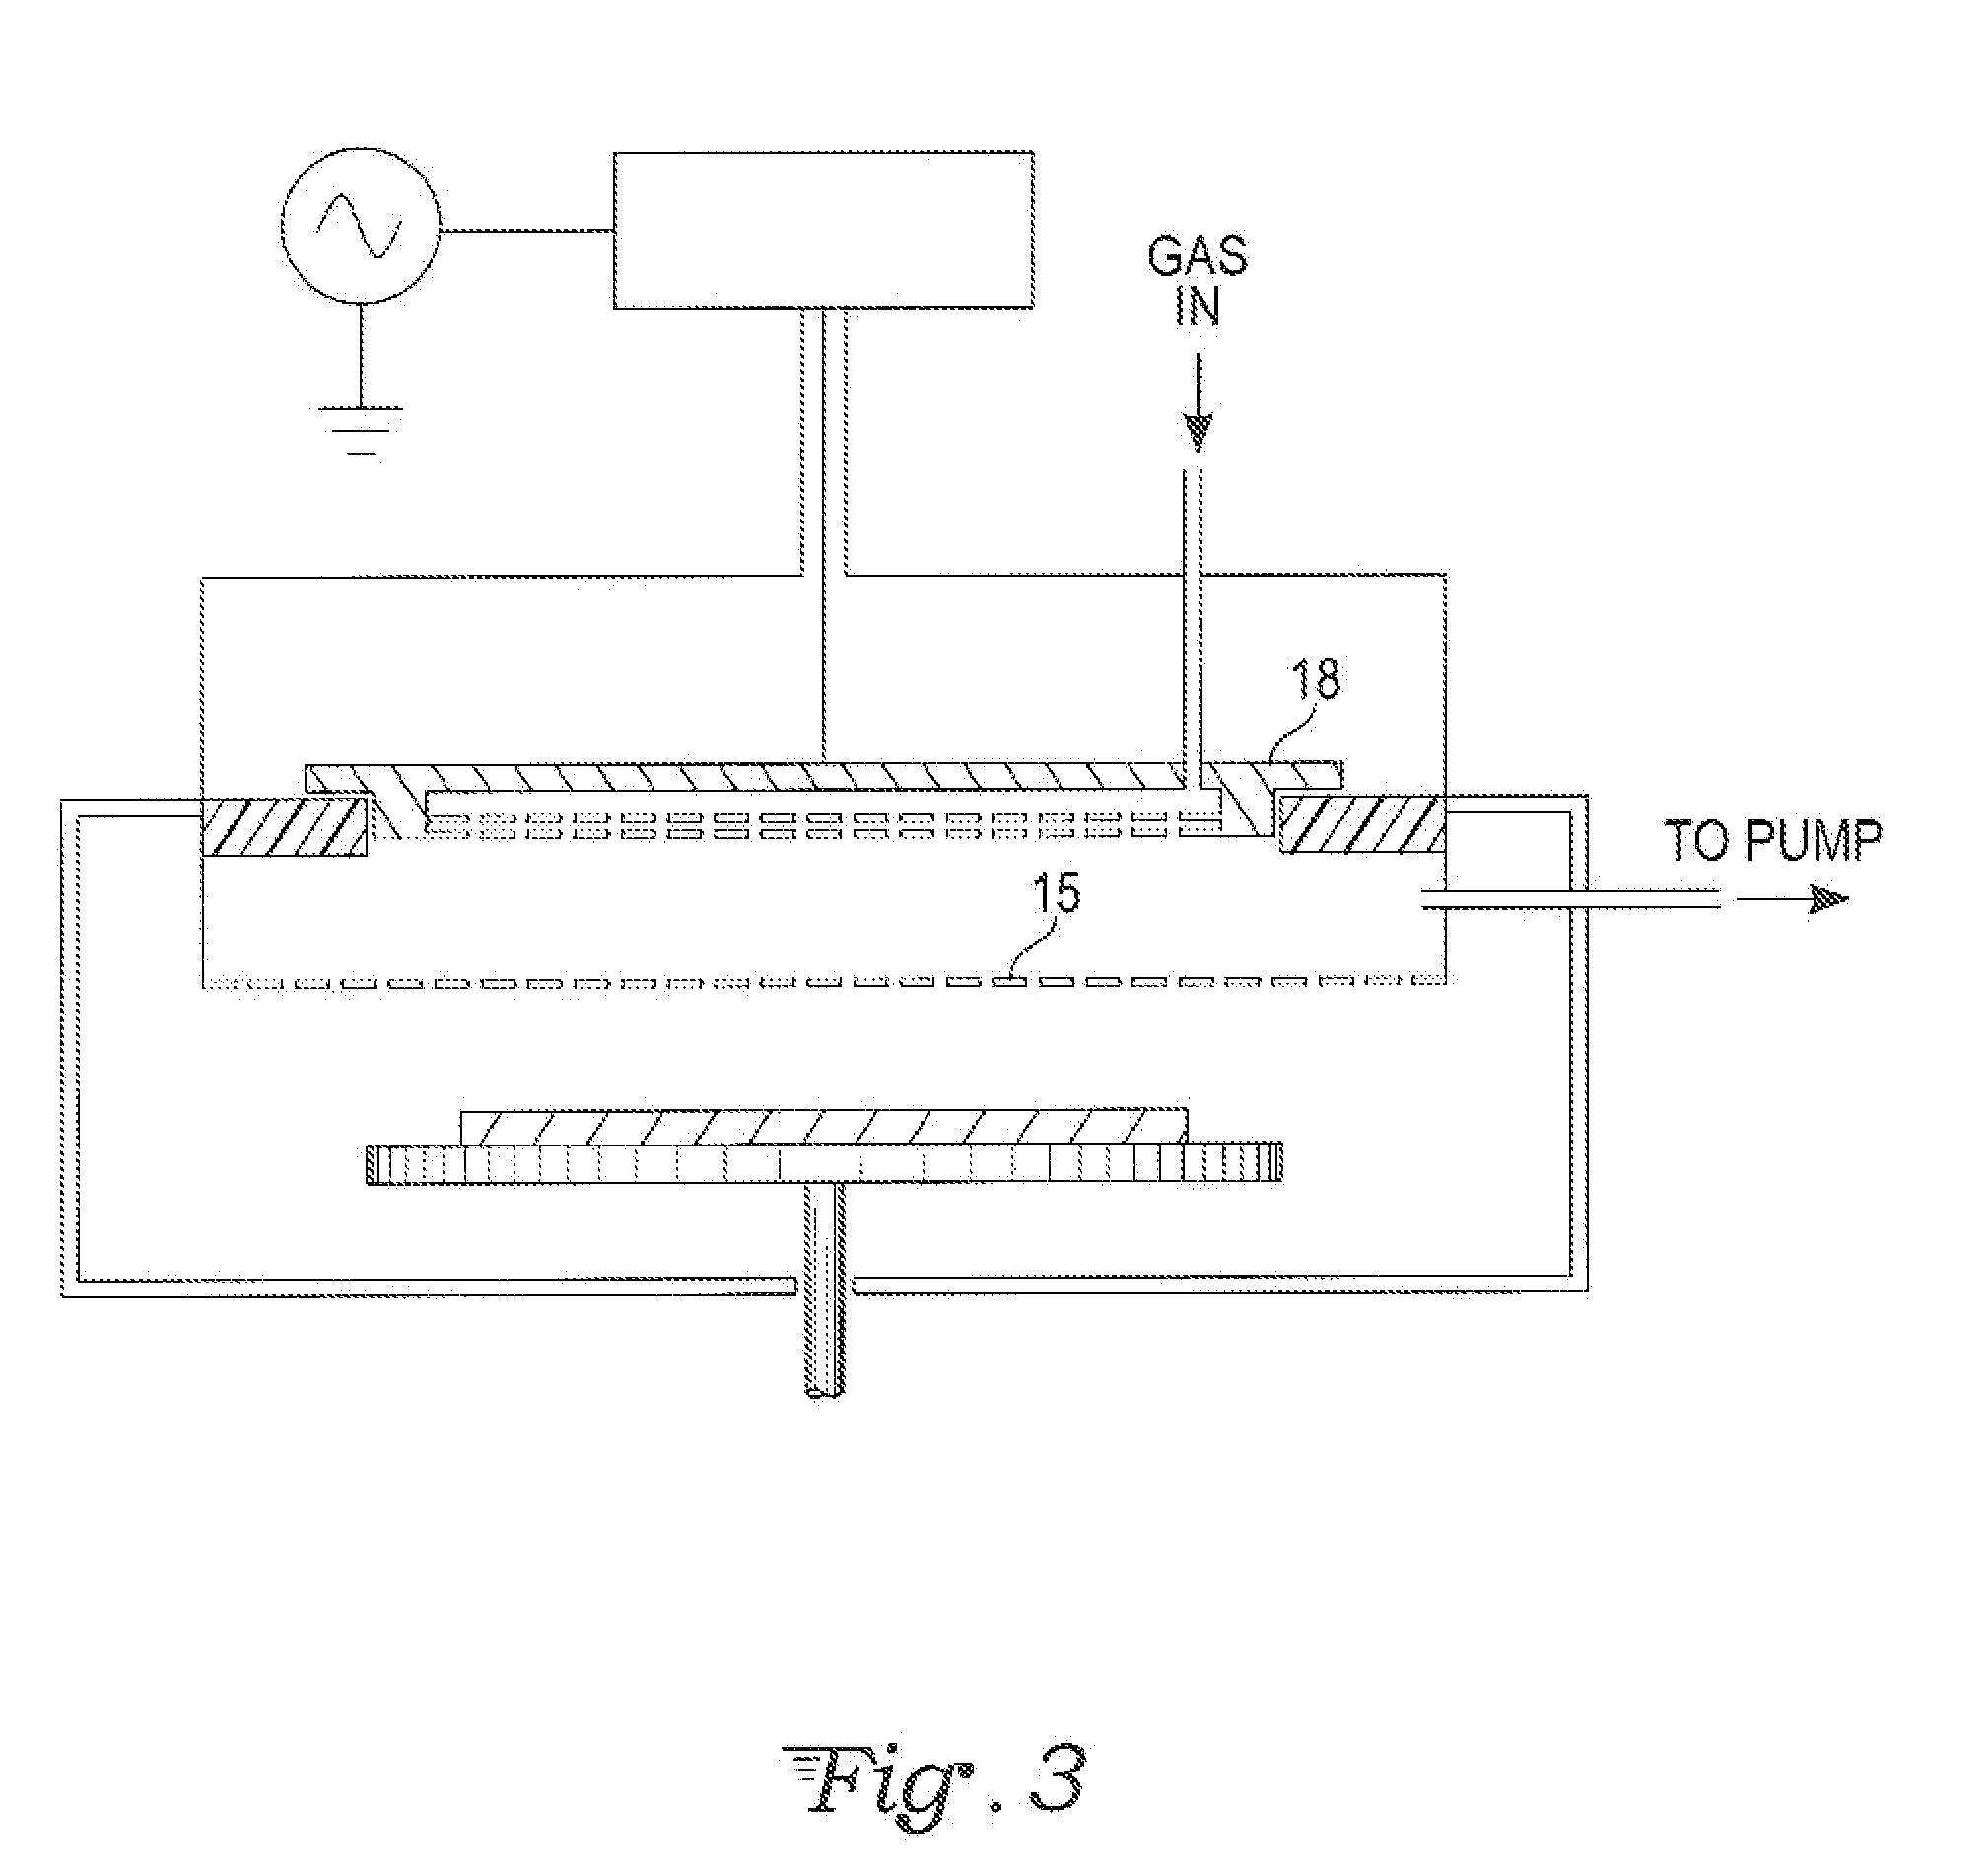 Capacitively coupled remote plasma source with large operating pressure range